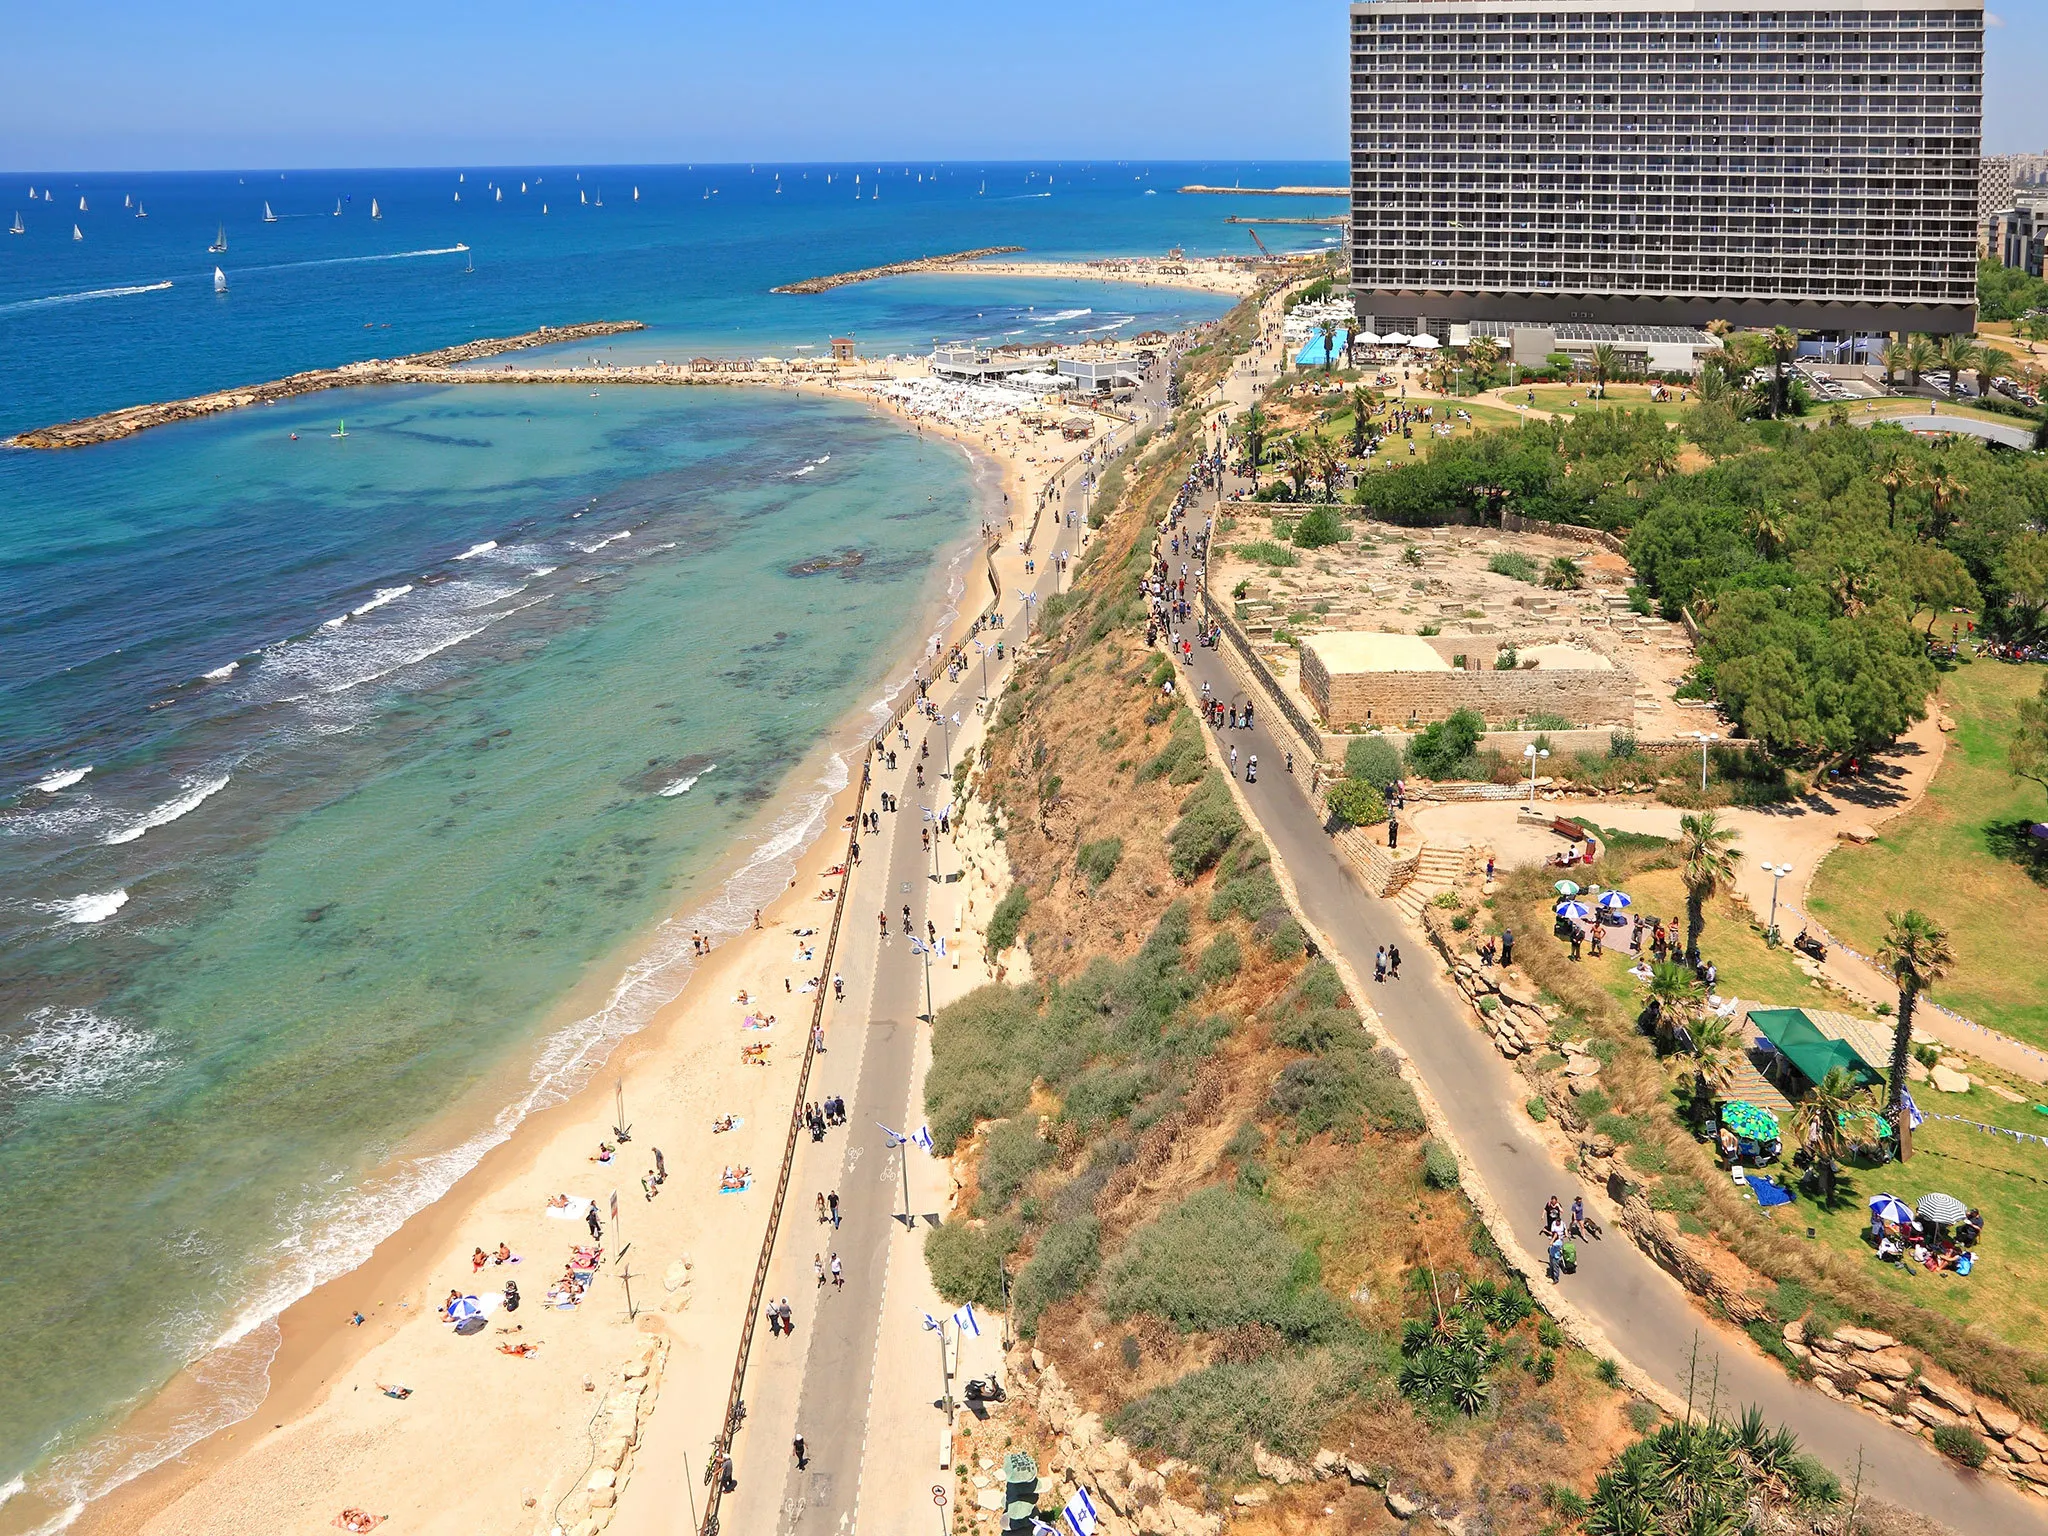 Tel Aviv Promenade in Israel, Middle East | Architecture - Rated 3.8